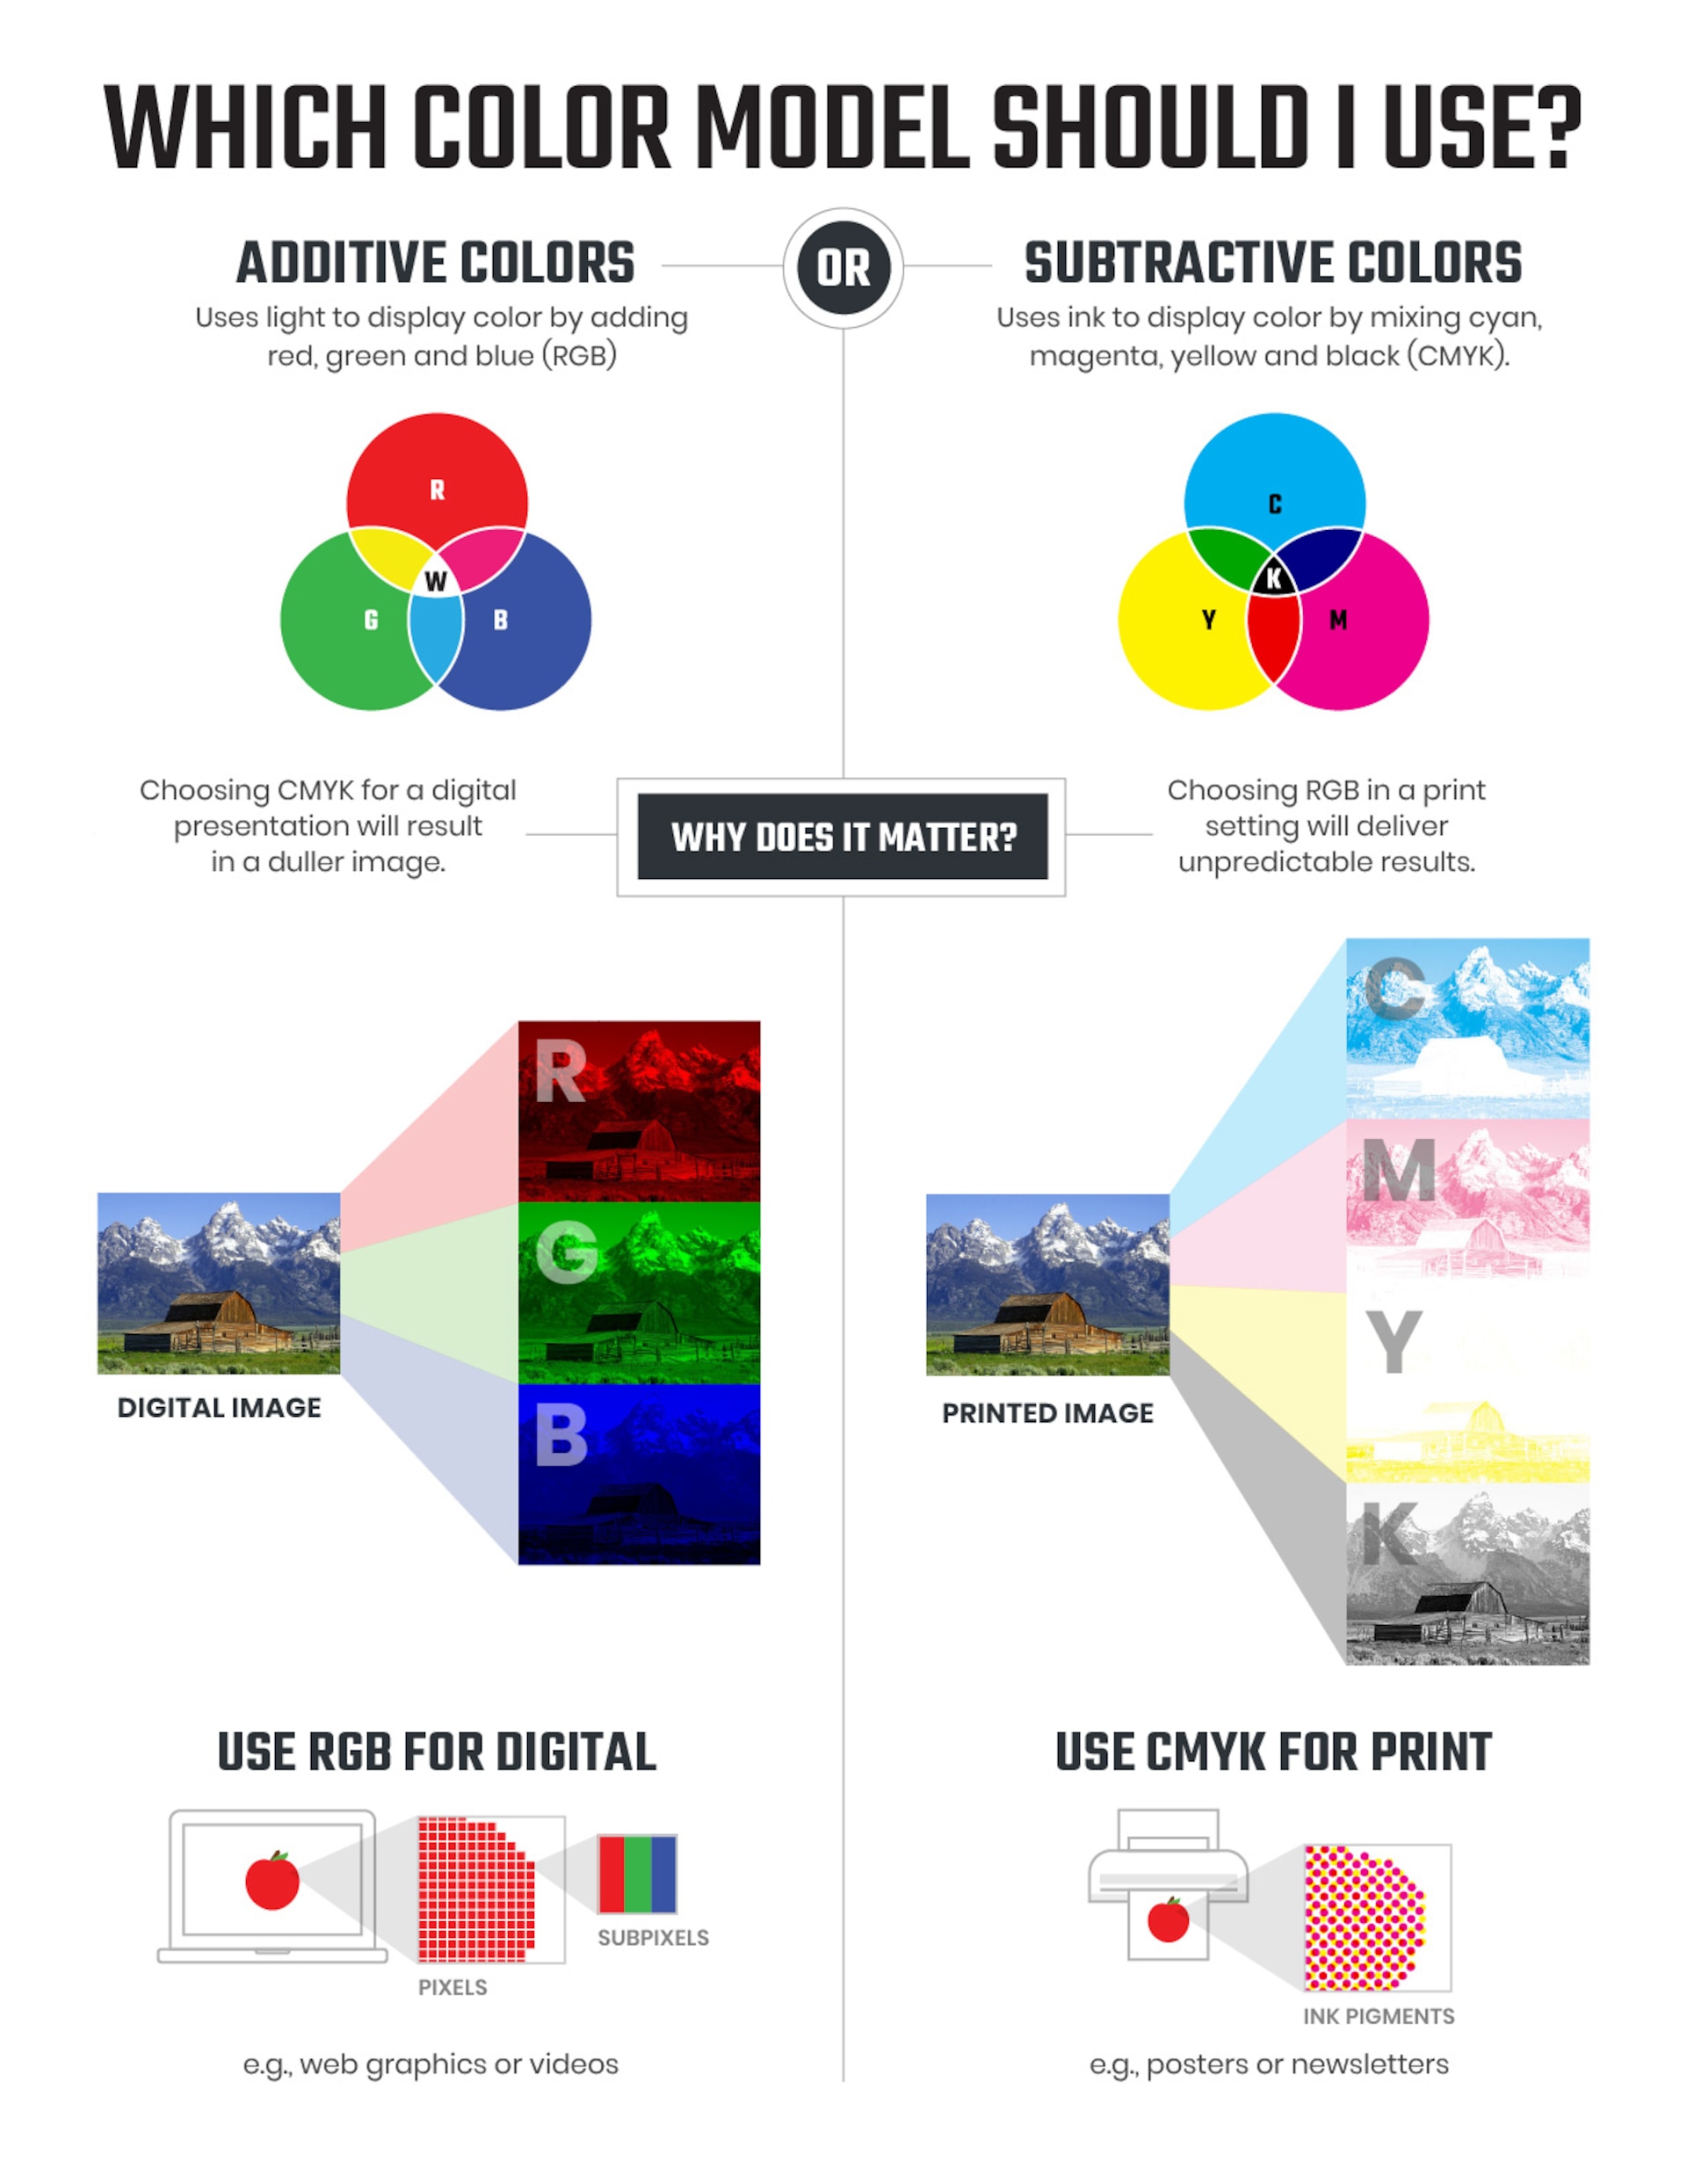 An infographic that compares the additive and subtractive color models and when to use each.